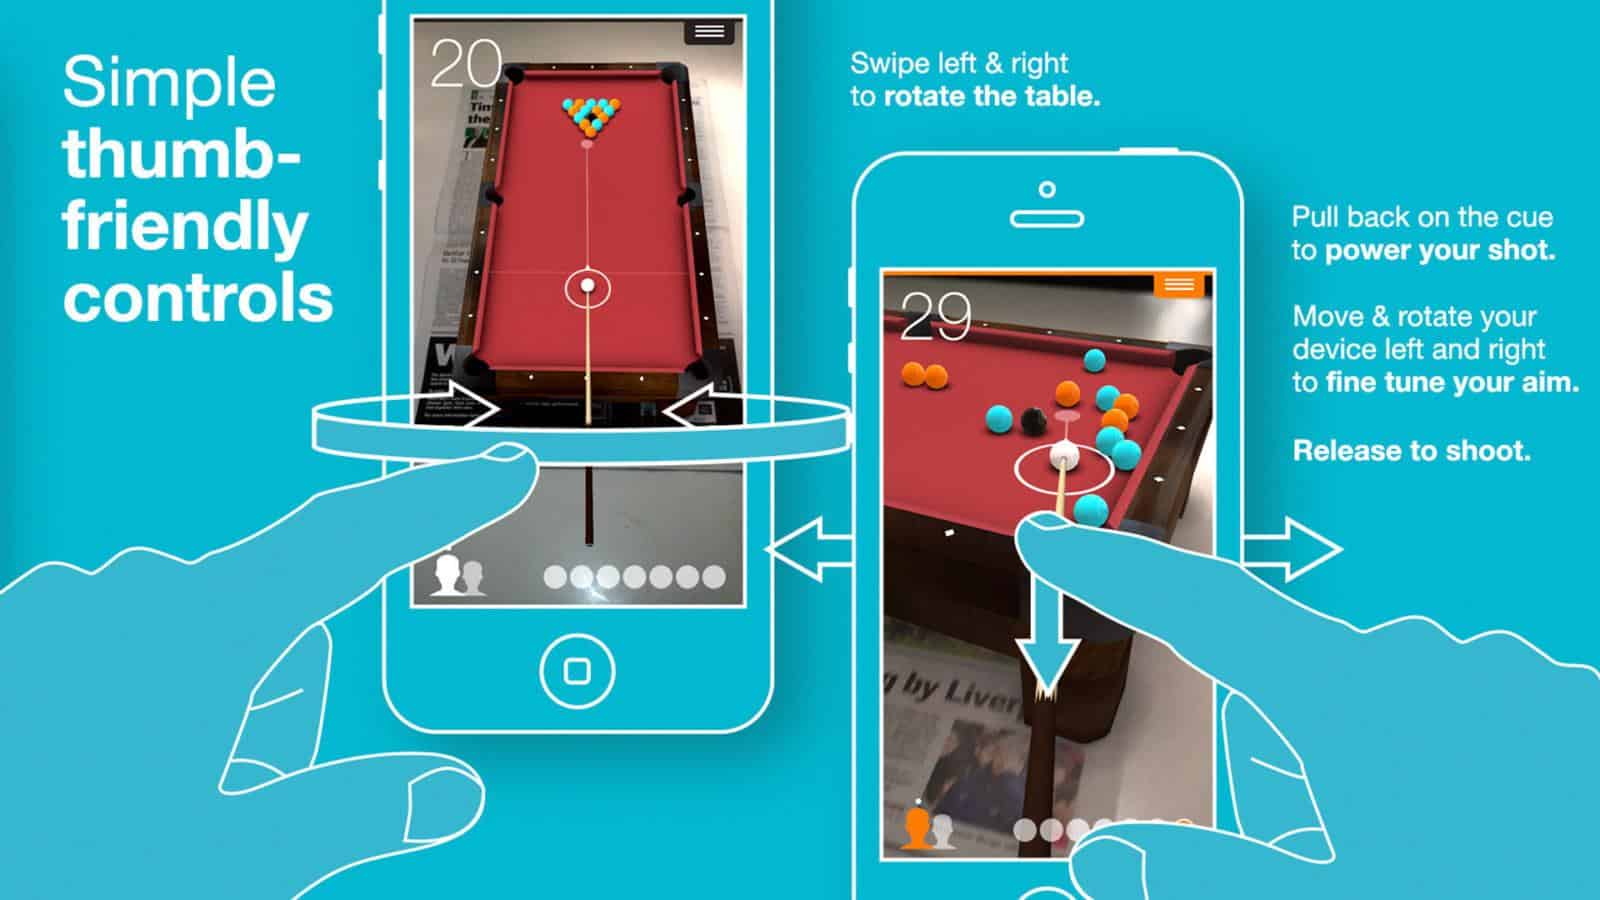 Reality Pool augmented reality game app